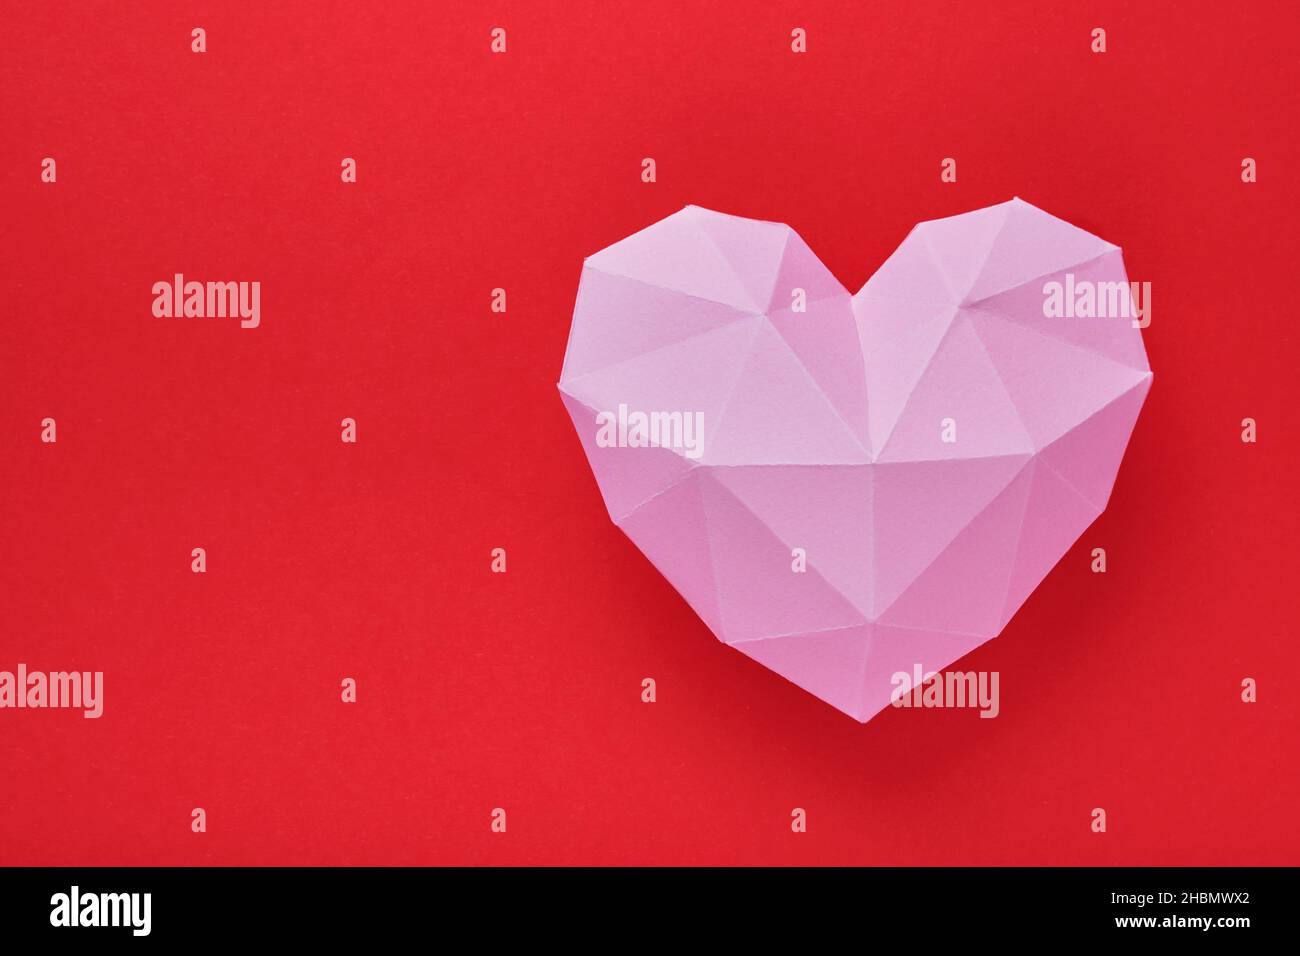 Pink paper heart isolated on red background. Red polygonal paper heart for Valentine's day or any other Love invitation cards. Top view, copy space. Stock Photo